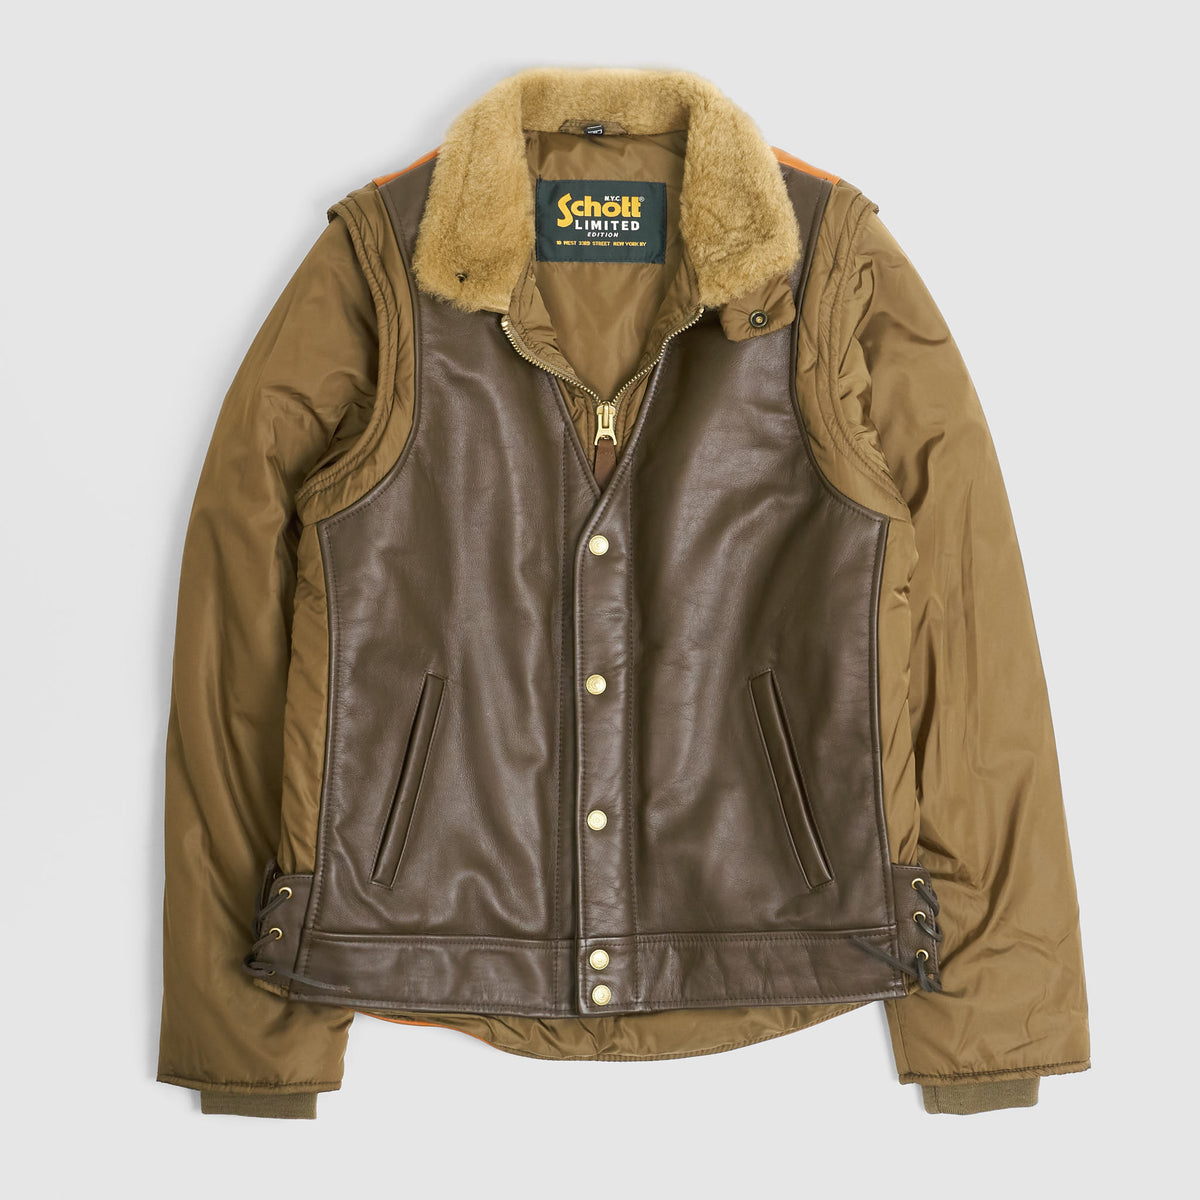 Schott N.Y.C. Padded Leather Jacket and Vest